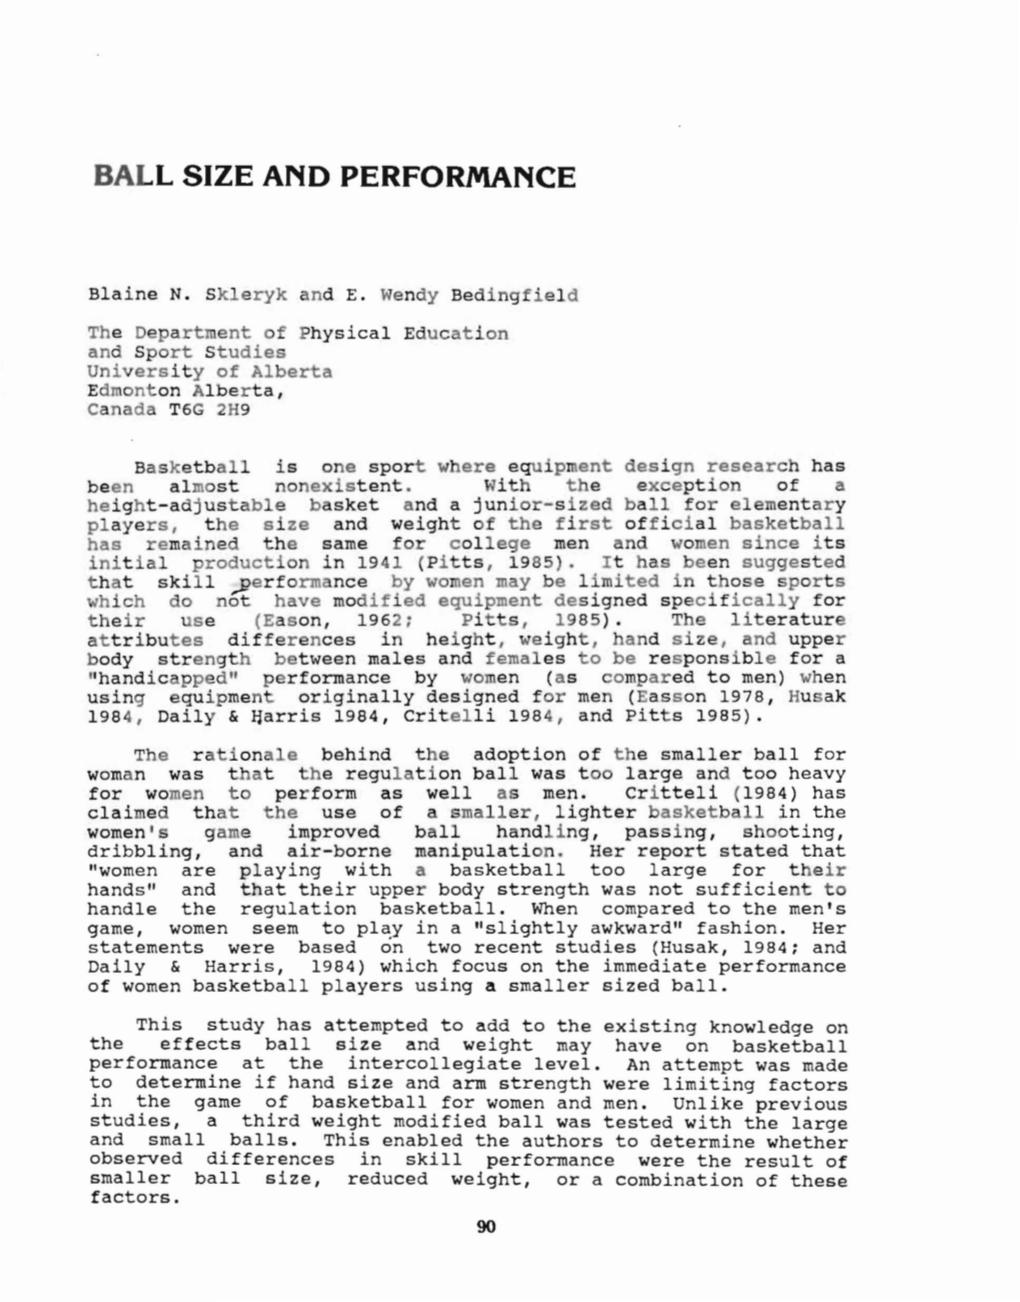 Ball Size and Performance